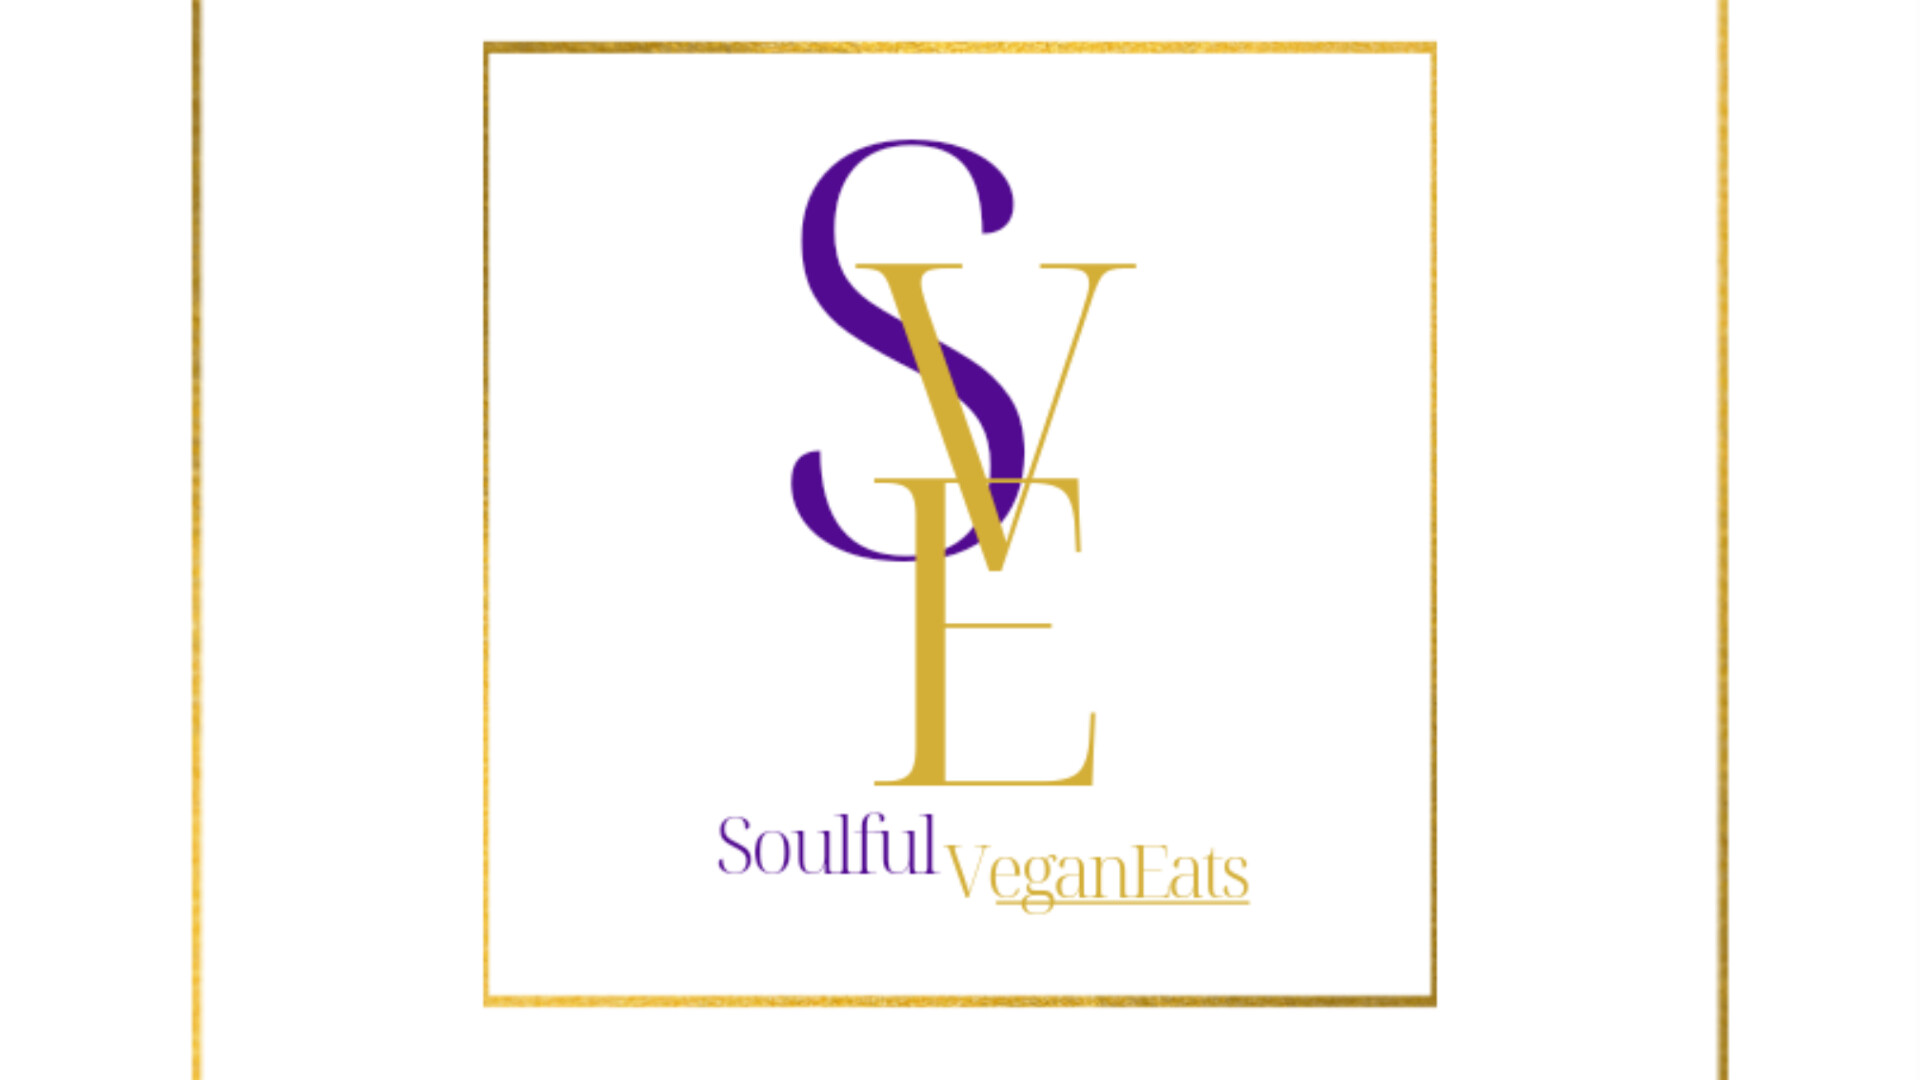 ‘Soulful VeganEats’ Meal Plan Owner, Interview